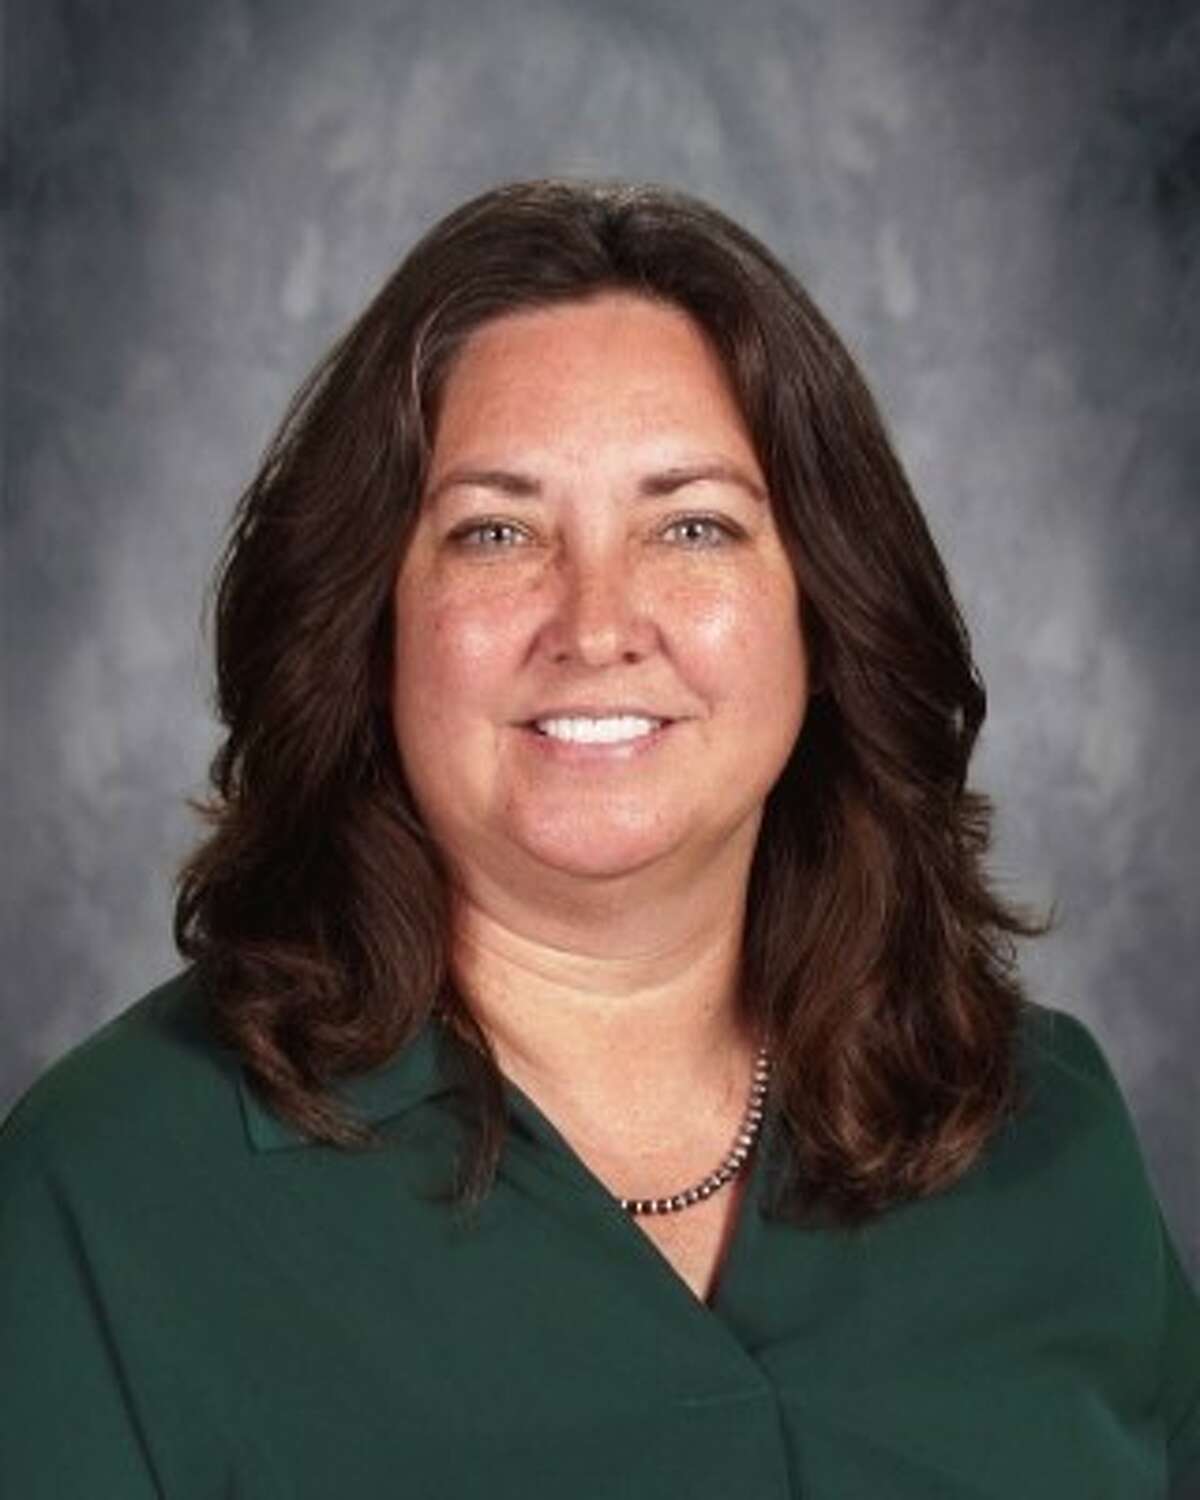 Jody Pennock Heavner, an agriculture teacher in the Pikeland school district, has received a statewide honor for her work in career and technical education.